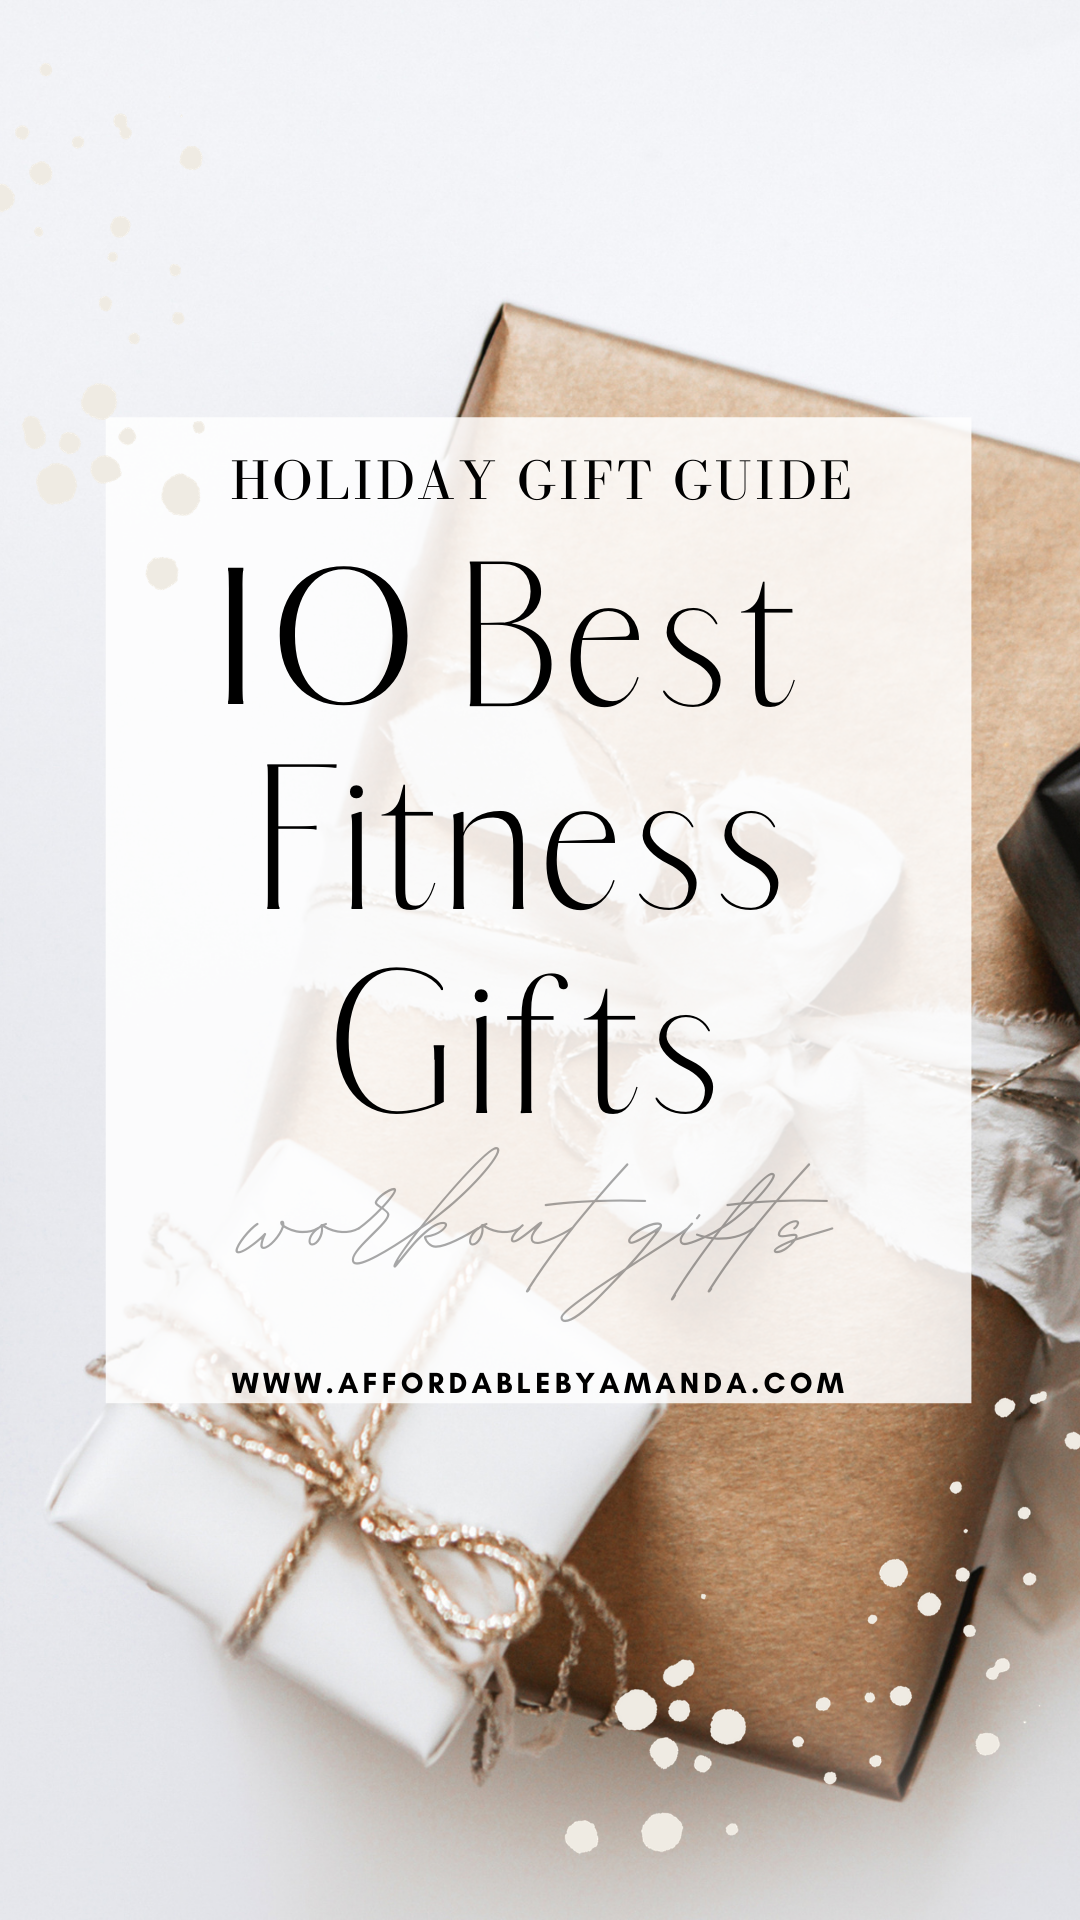 10 Best Fitness Gifts 2020 - Christmas Gifts for Workout Lovers